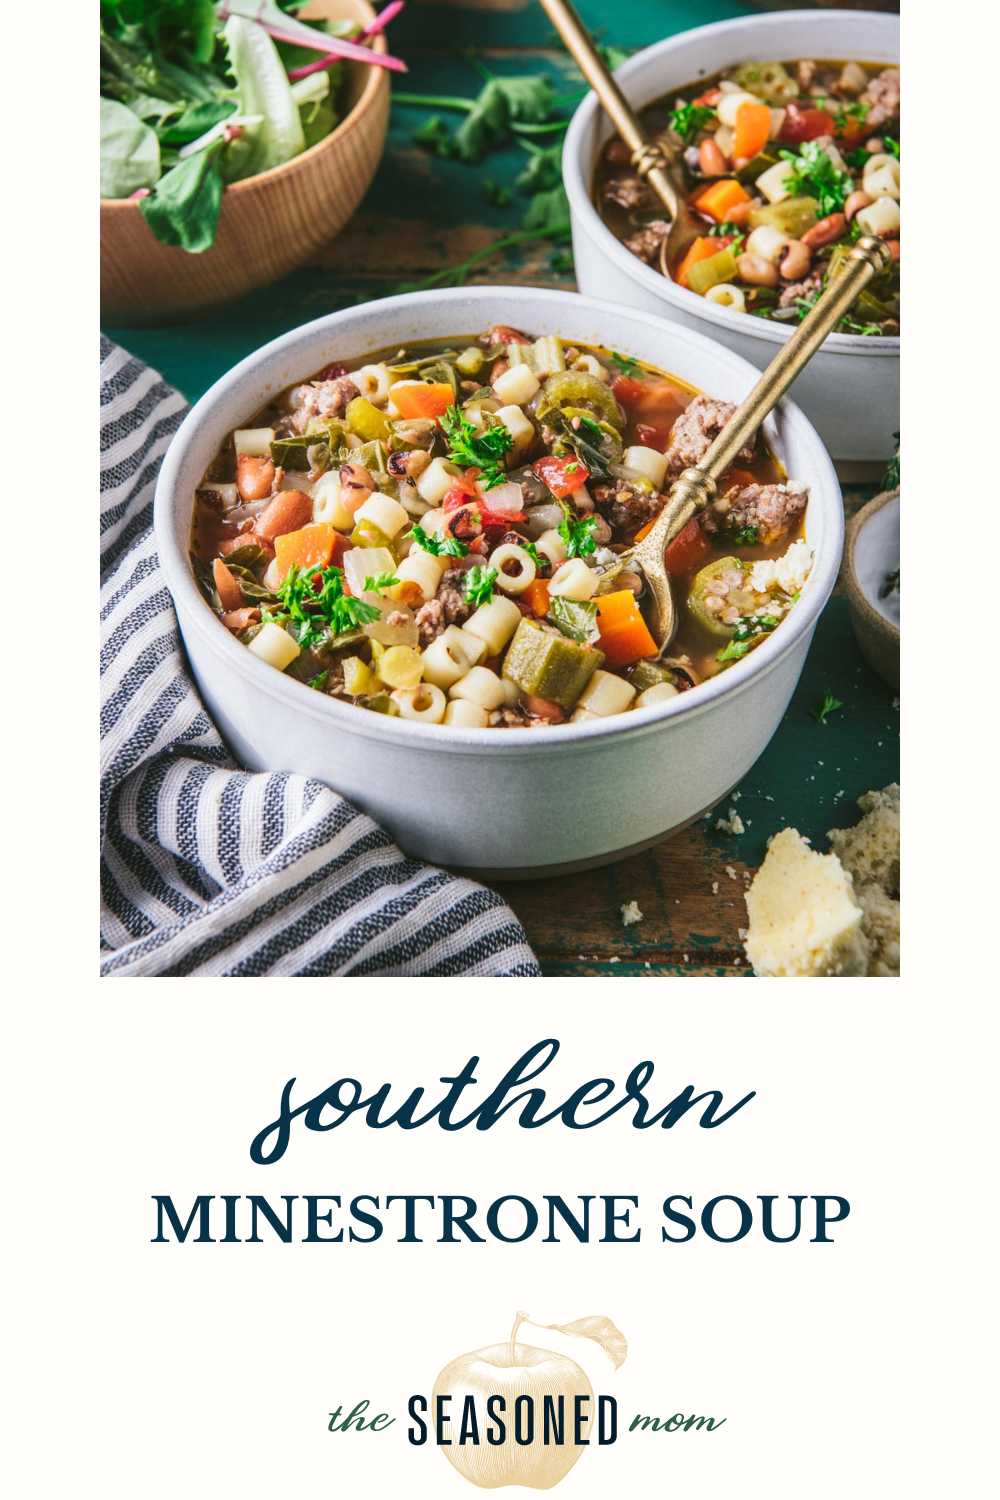 Southern Minestrone Soup - The Seasoned Mom